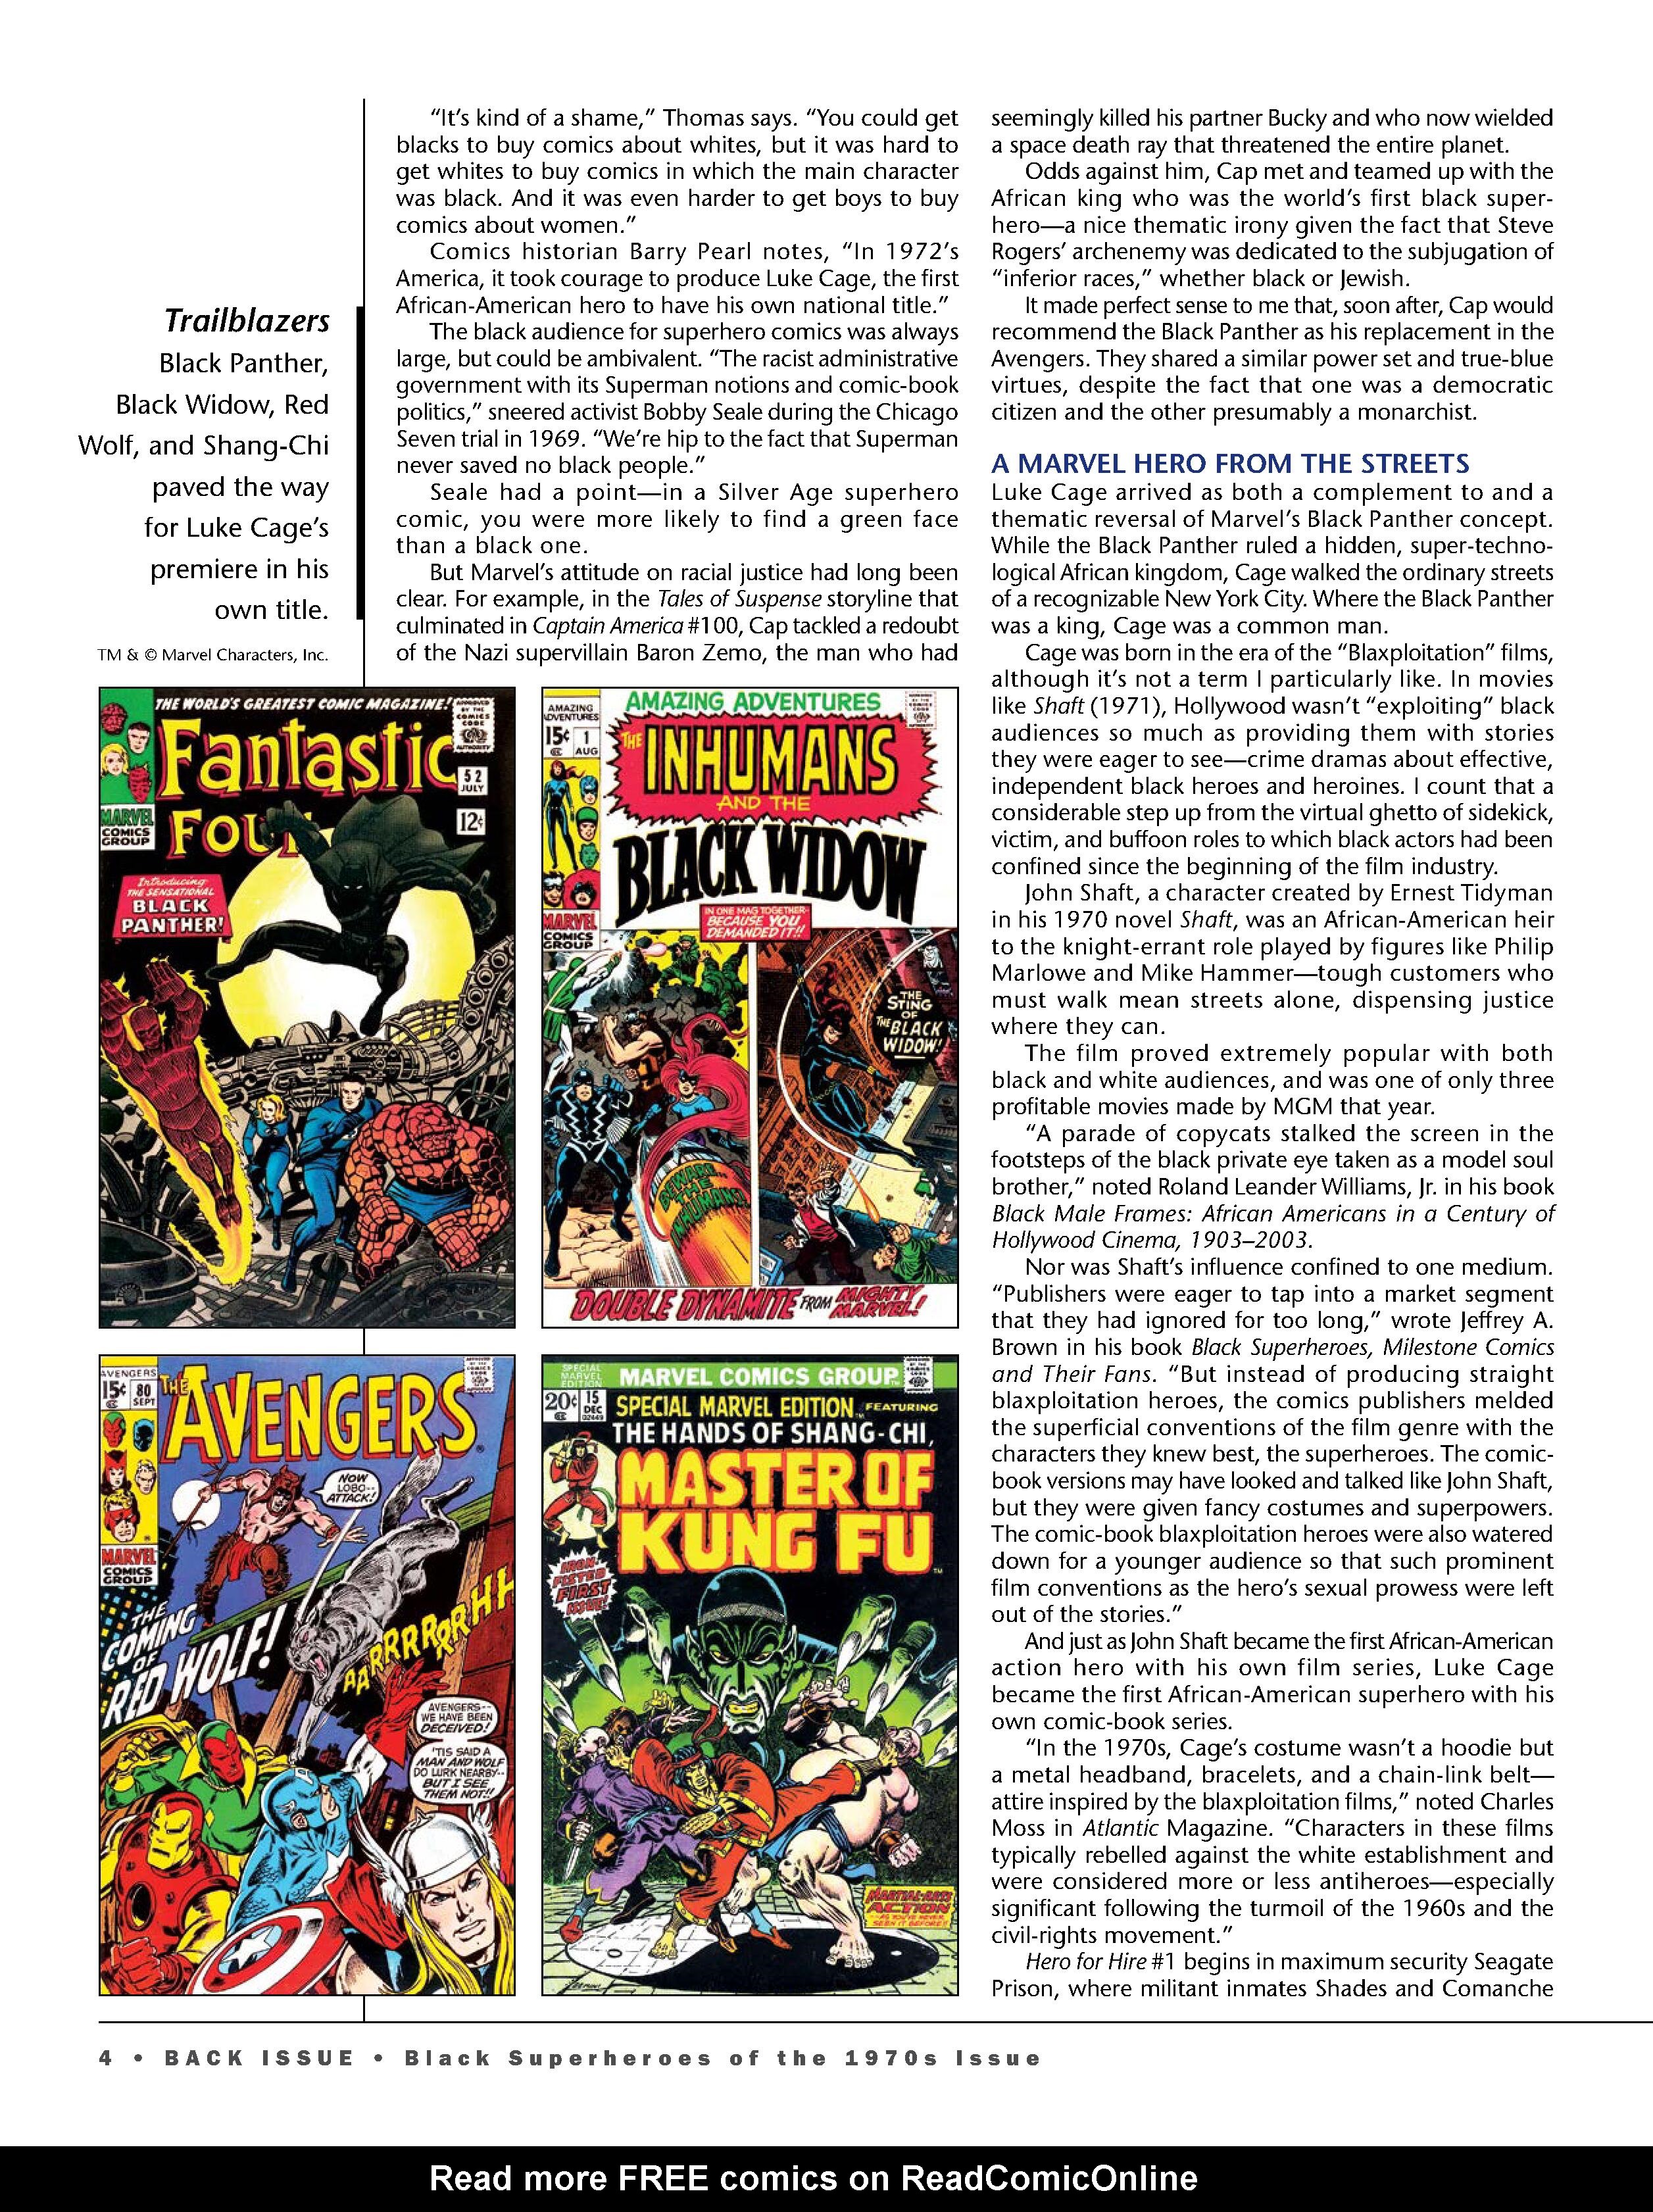 Read online Back Issue comic -  Issue #114 - 6